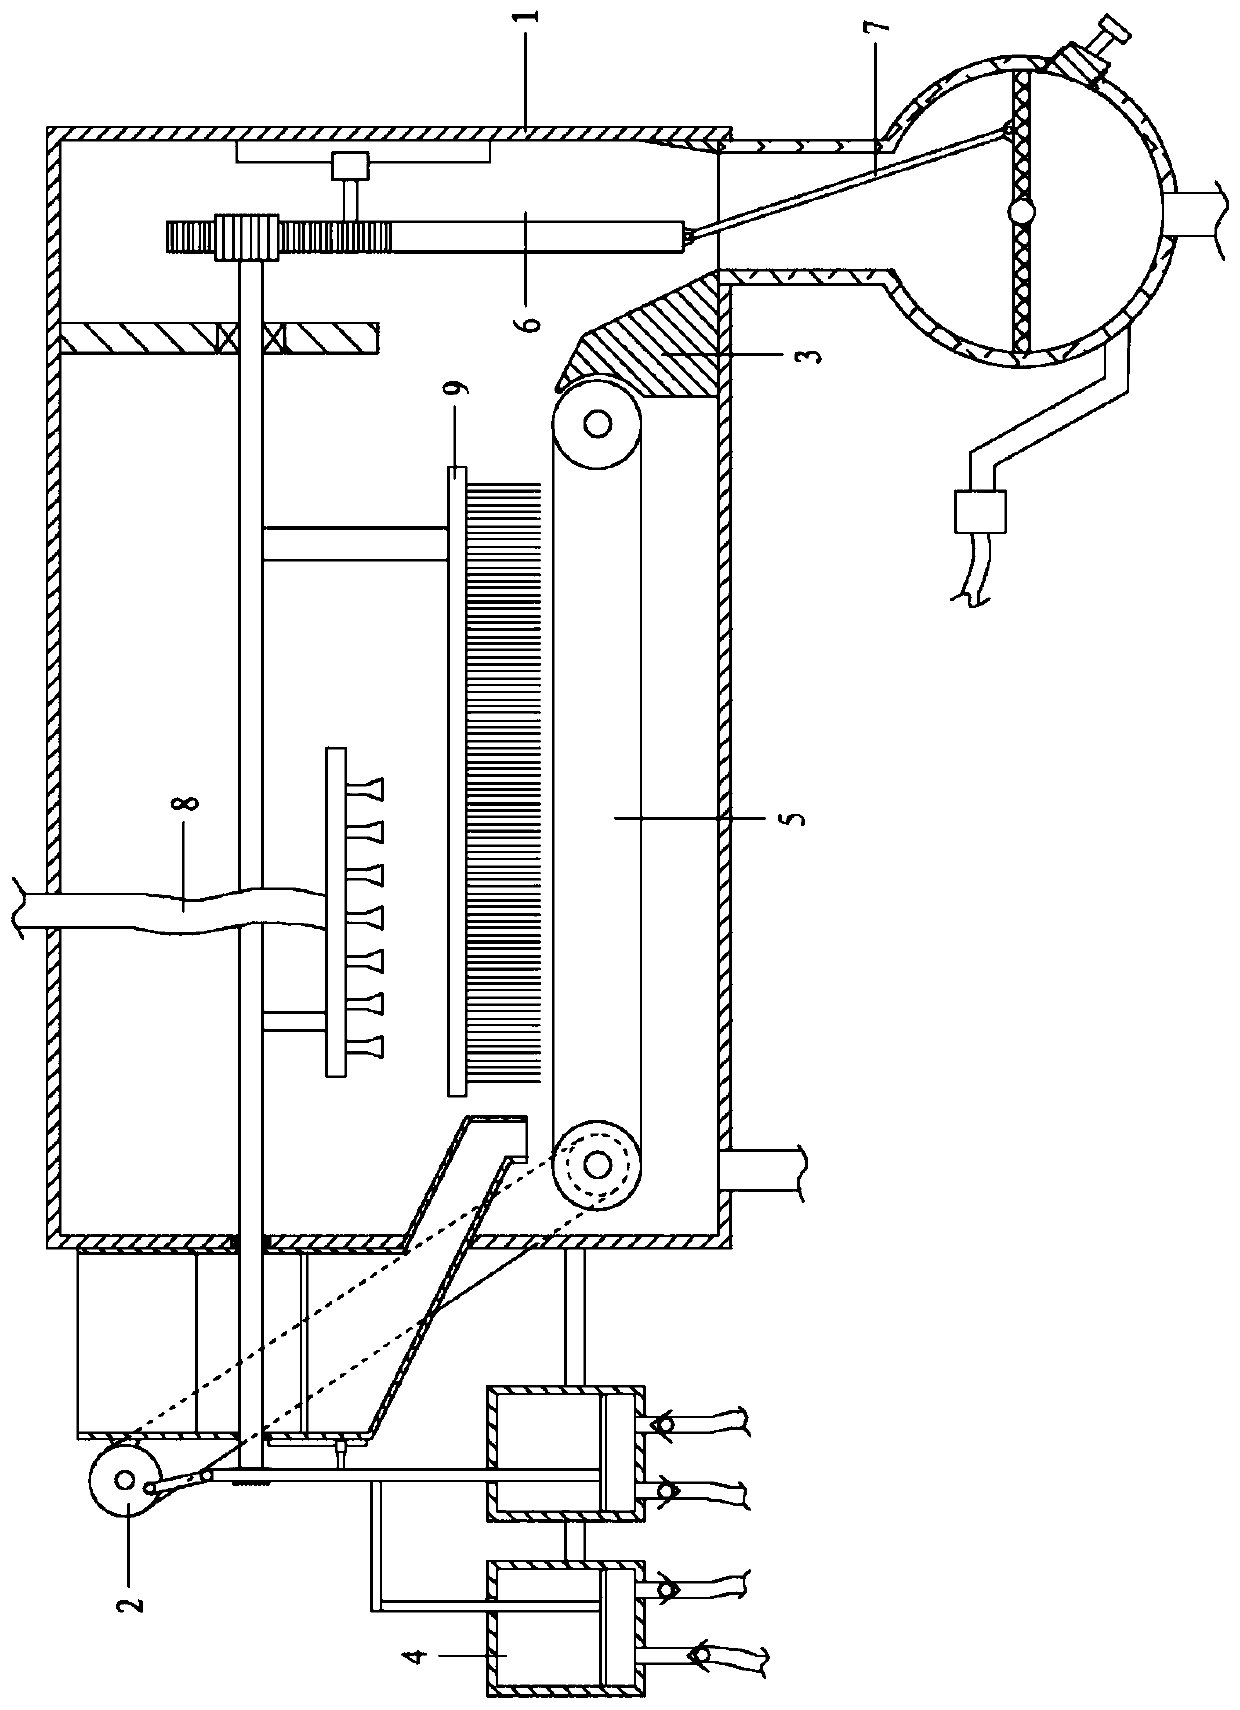 Cleaning and draining system for mechanical part machining